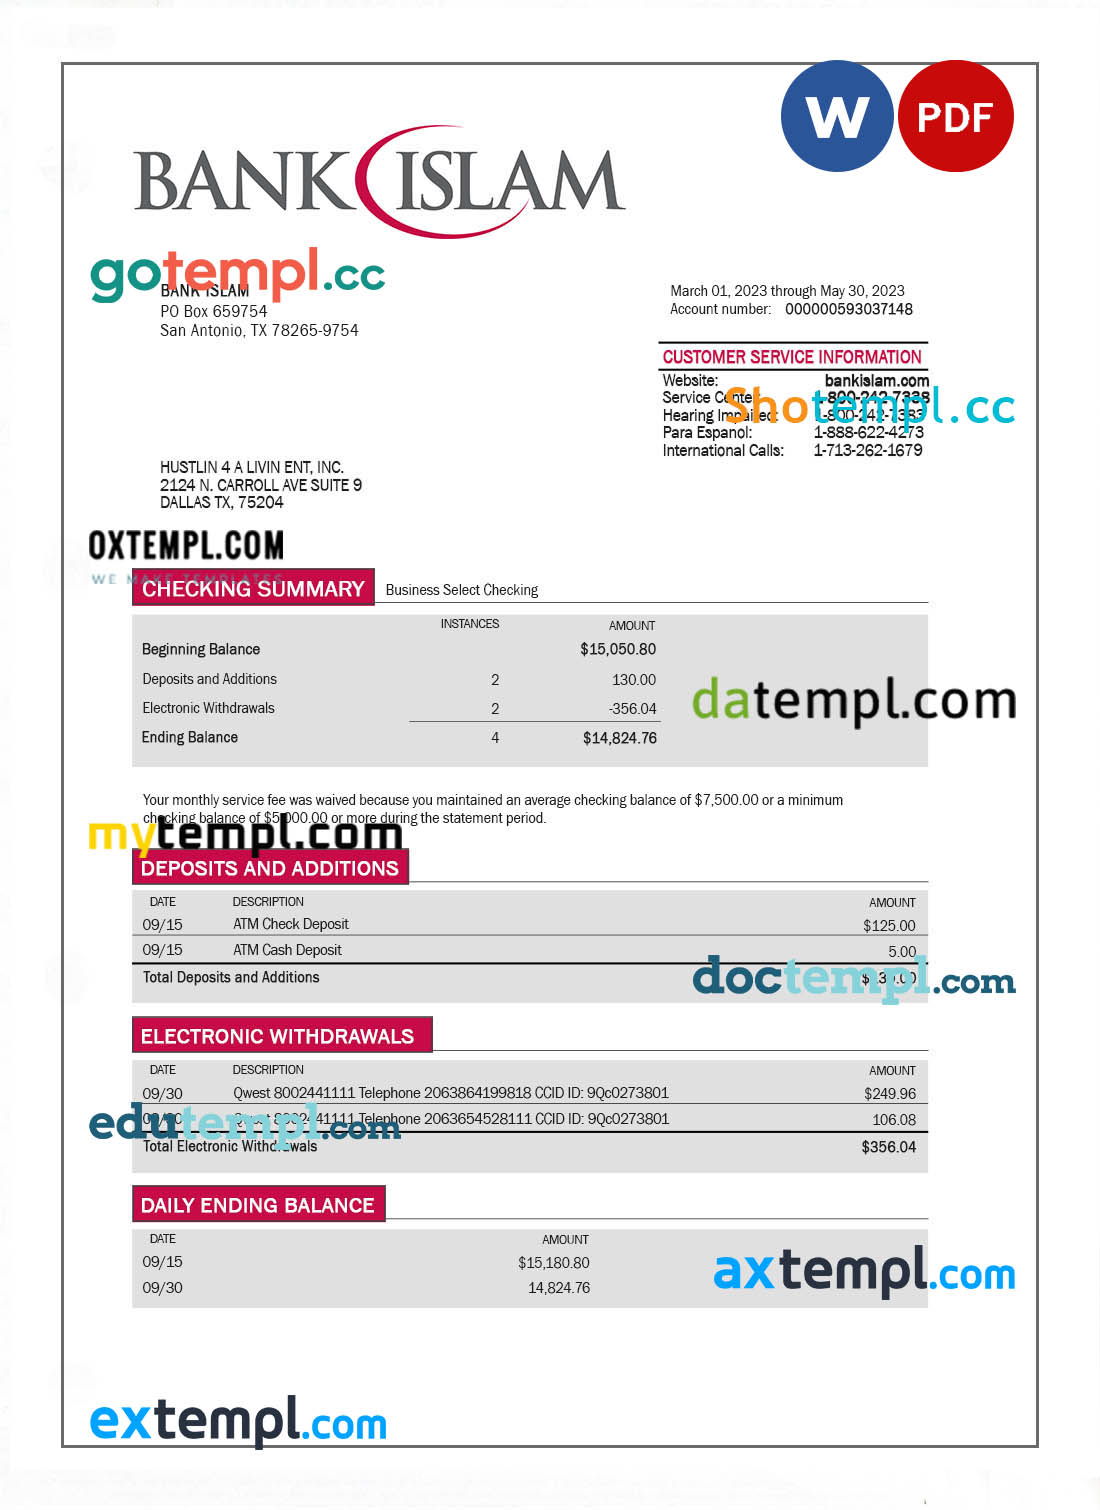 editable template, Bank Islam company account statement Word and PDF template